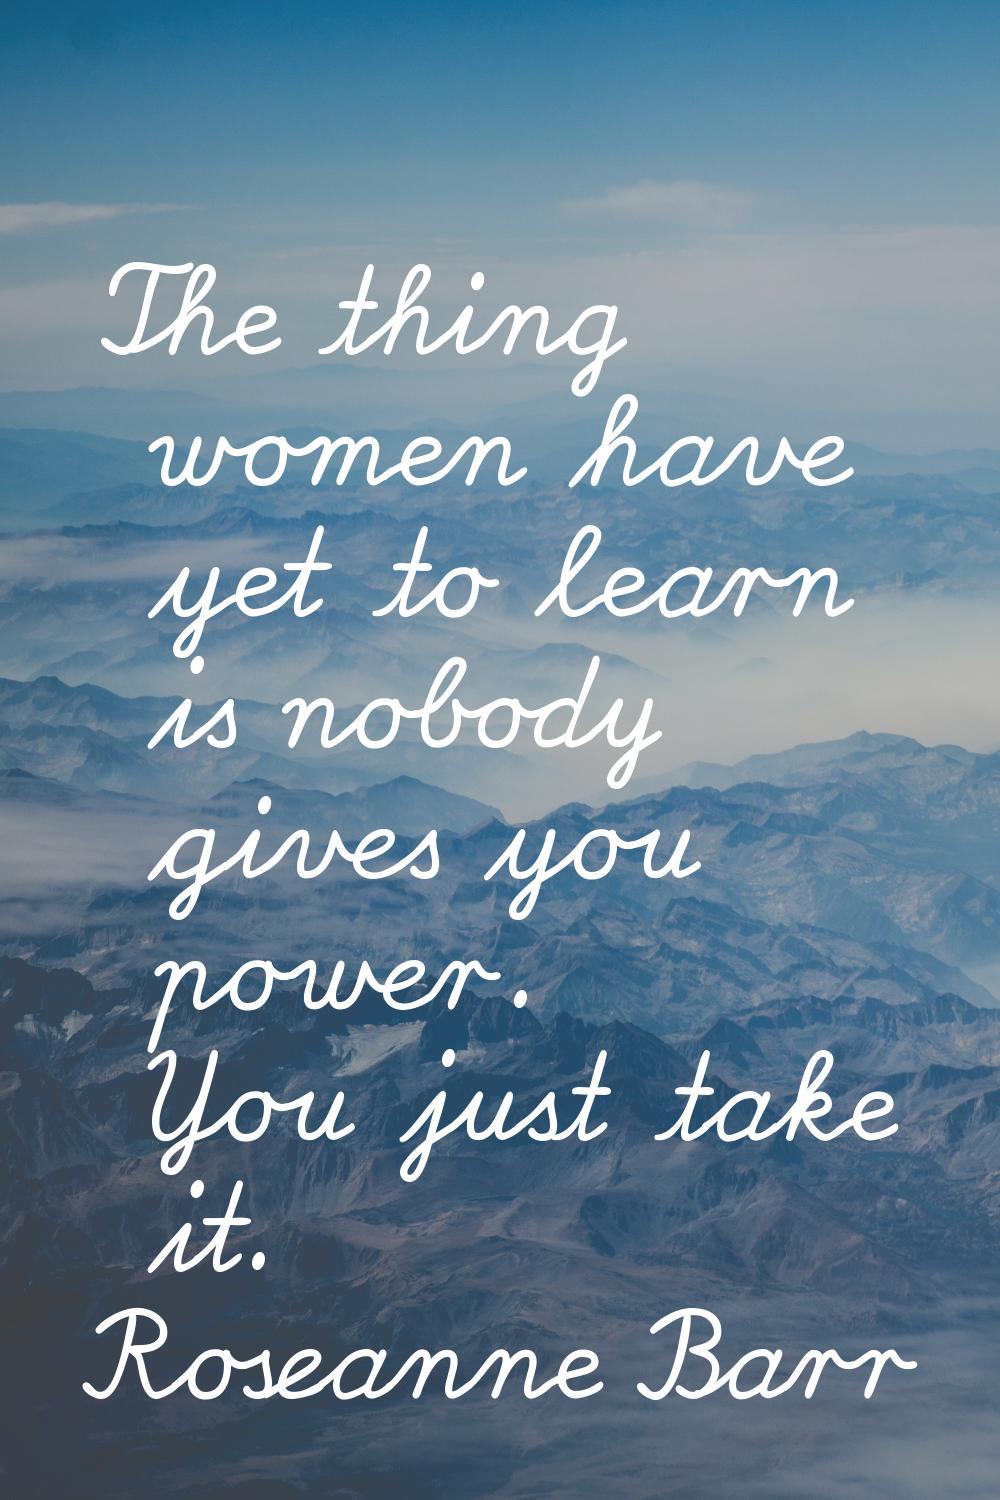 The thing women have yet to learn is nobody gives you power. You just take it.